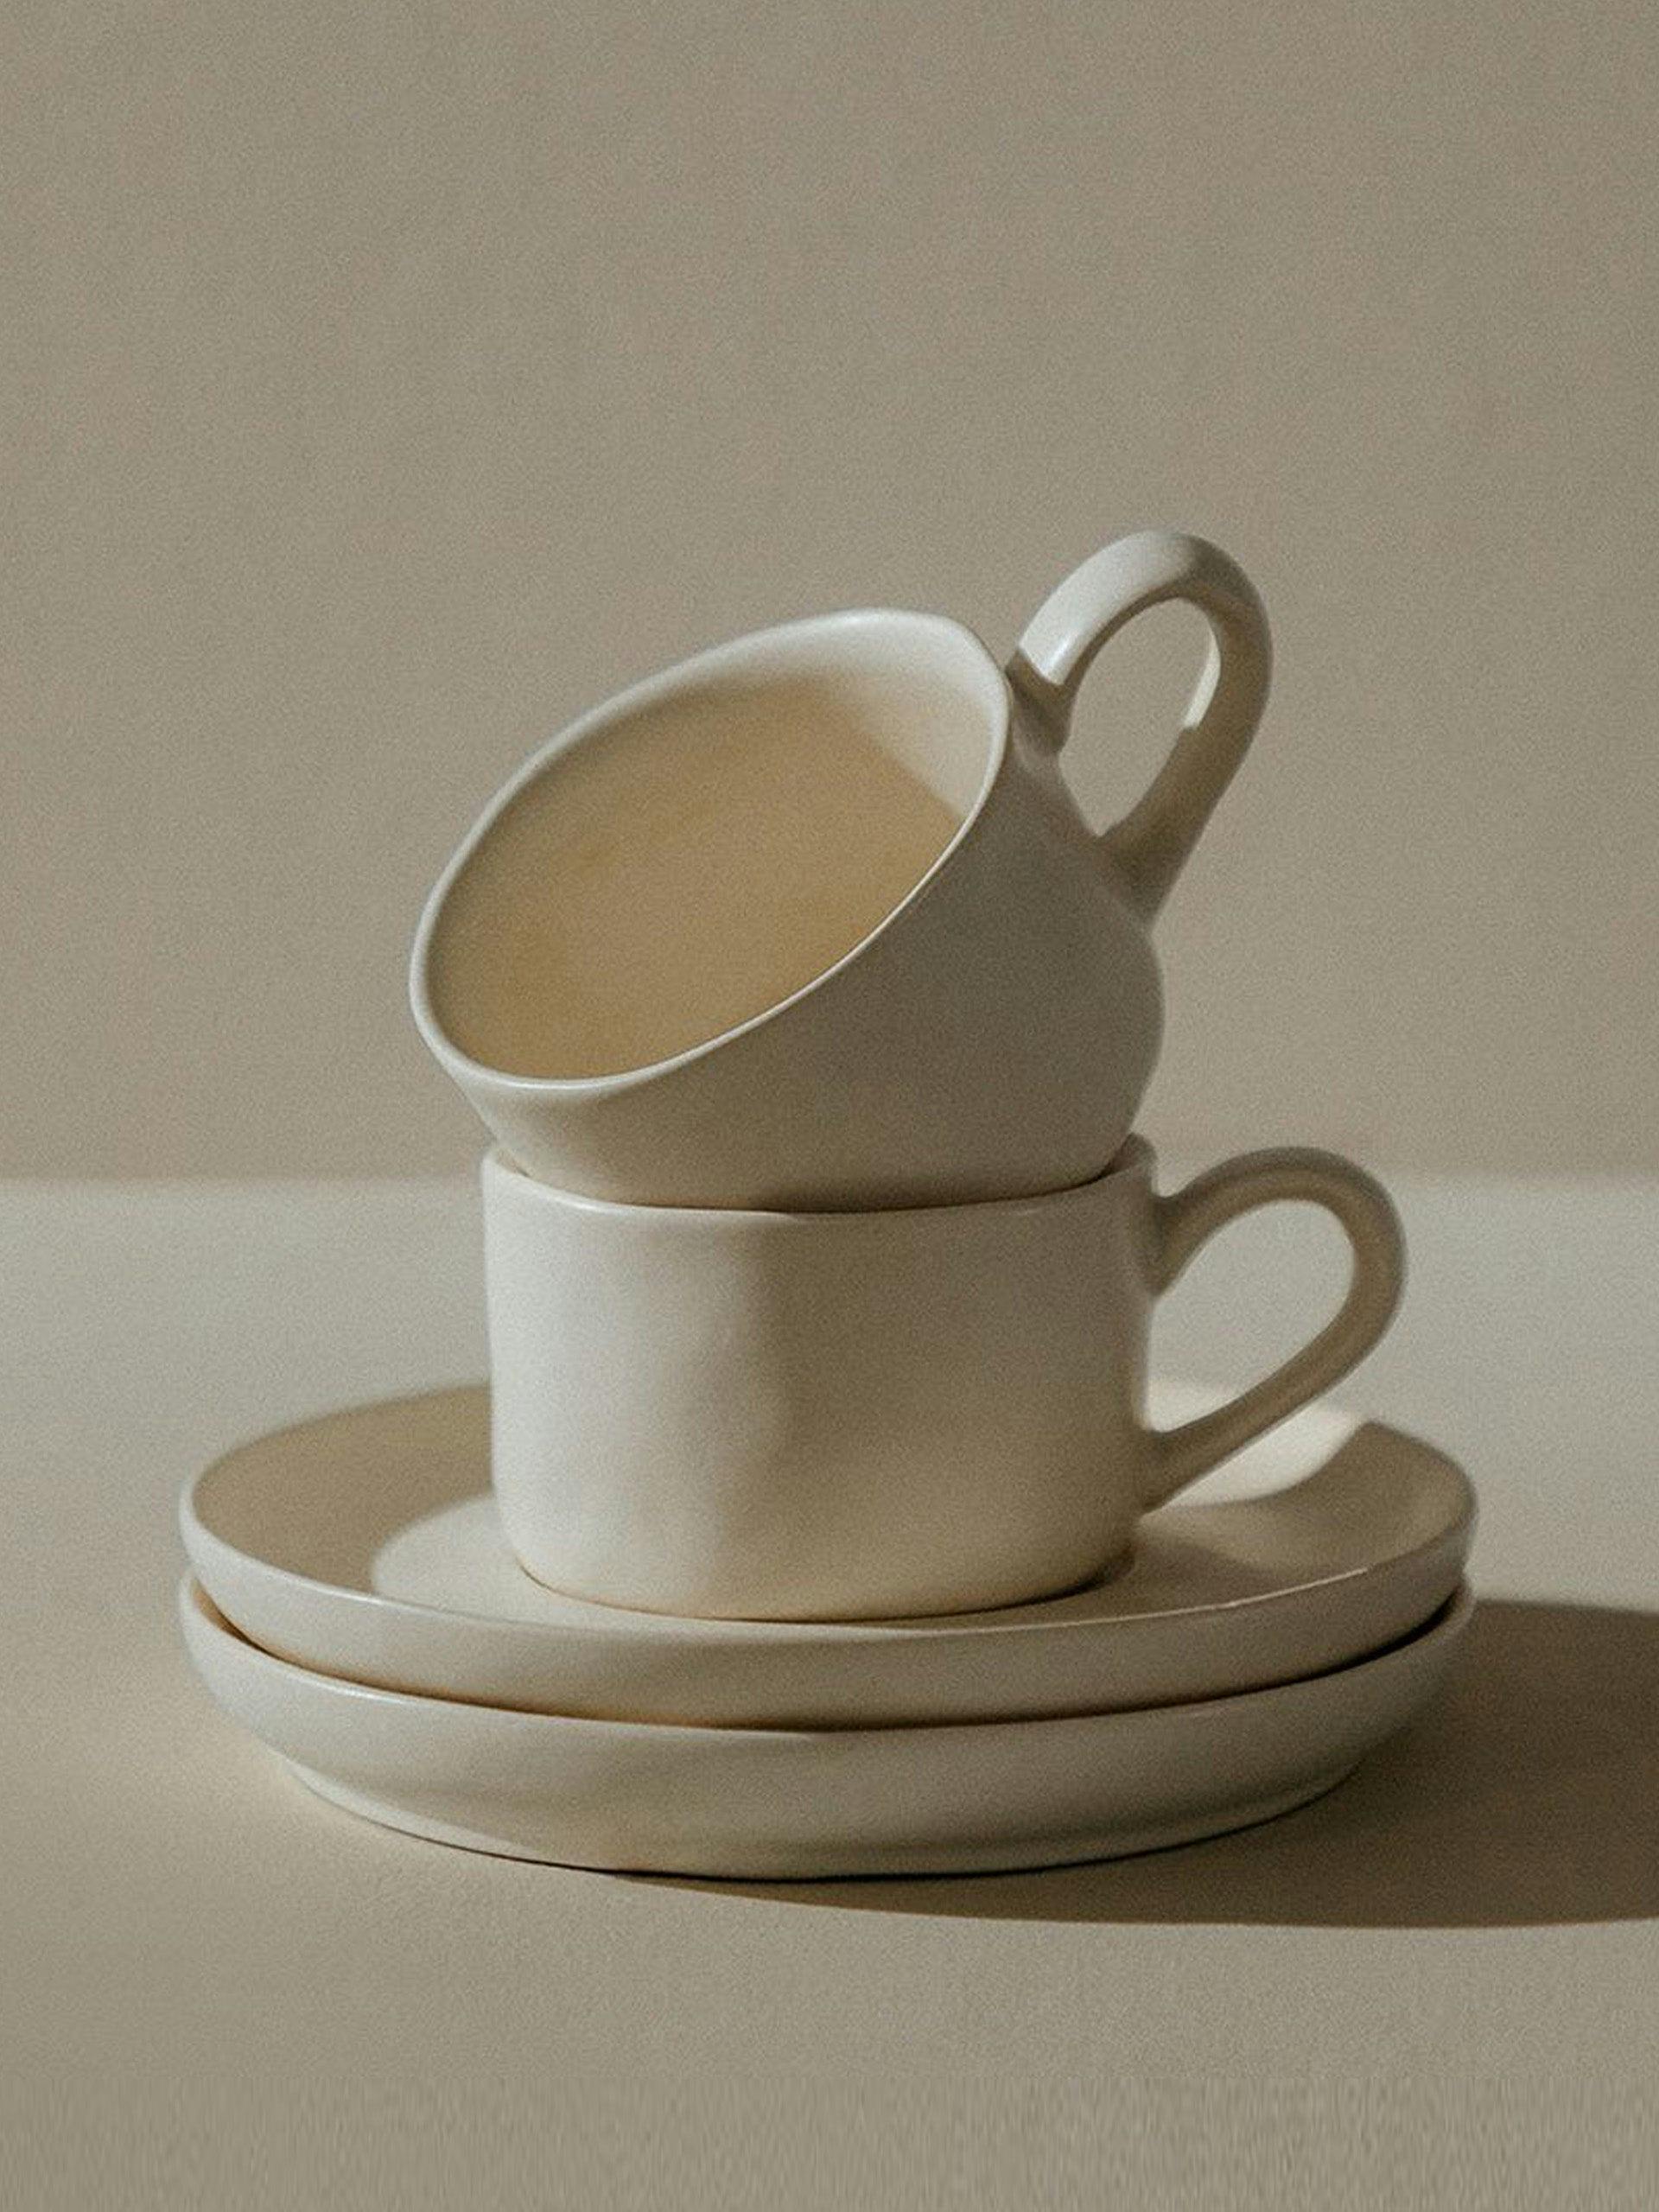 Belvere cups and saucers (set of 2)